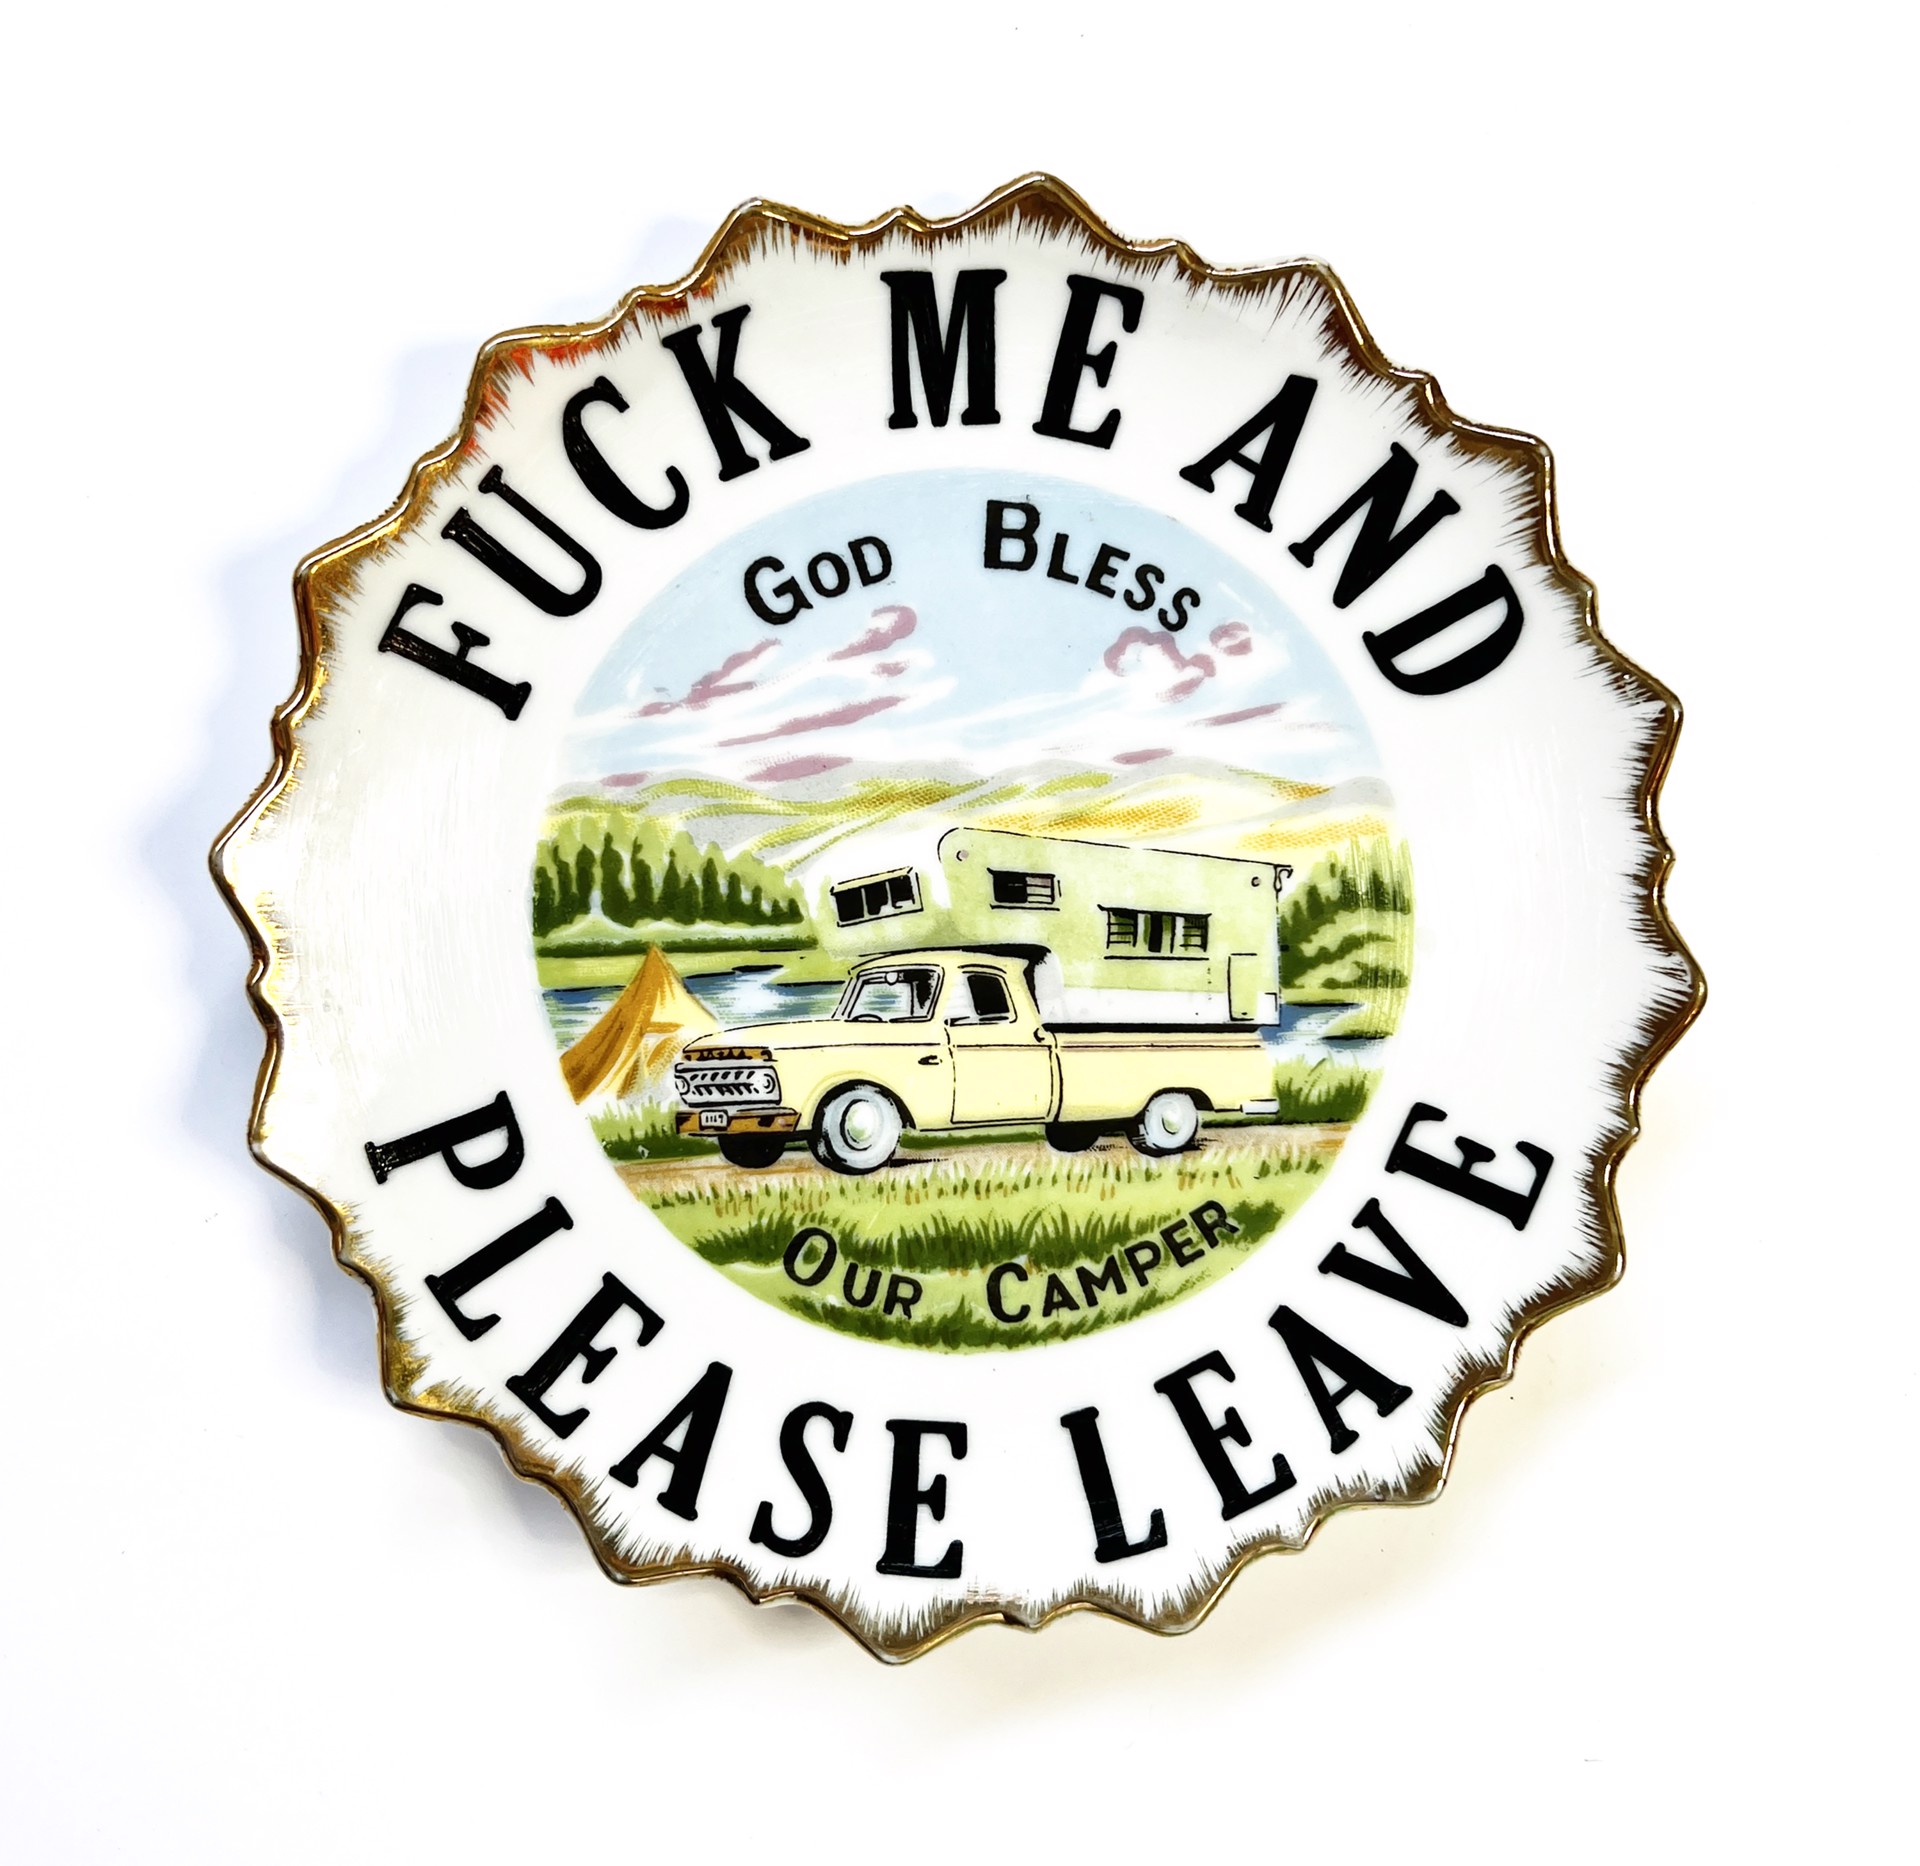 Fuck me and please leave (dessert plate) by Marie-Claude Marquis